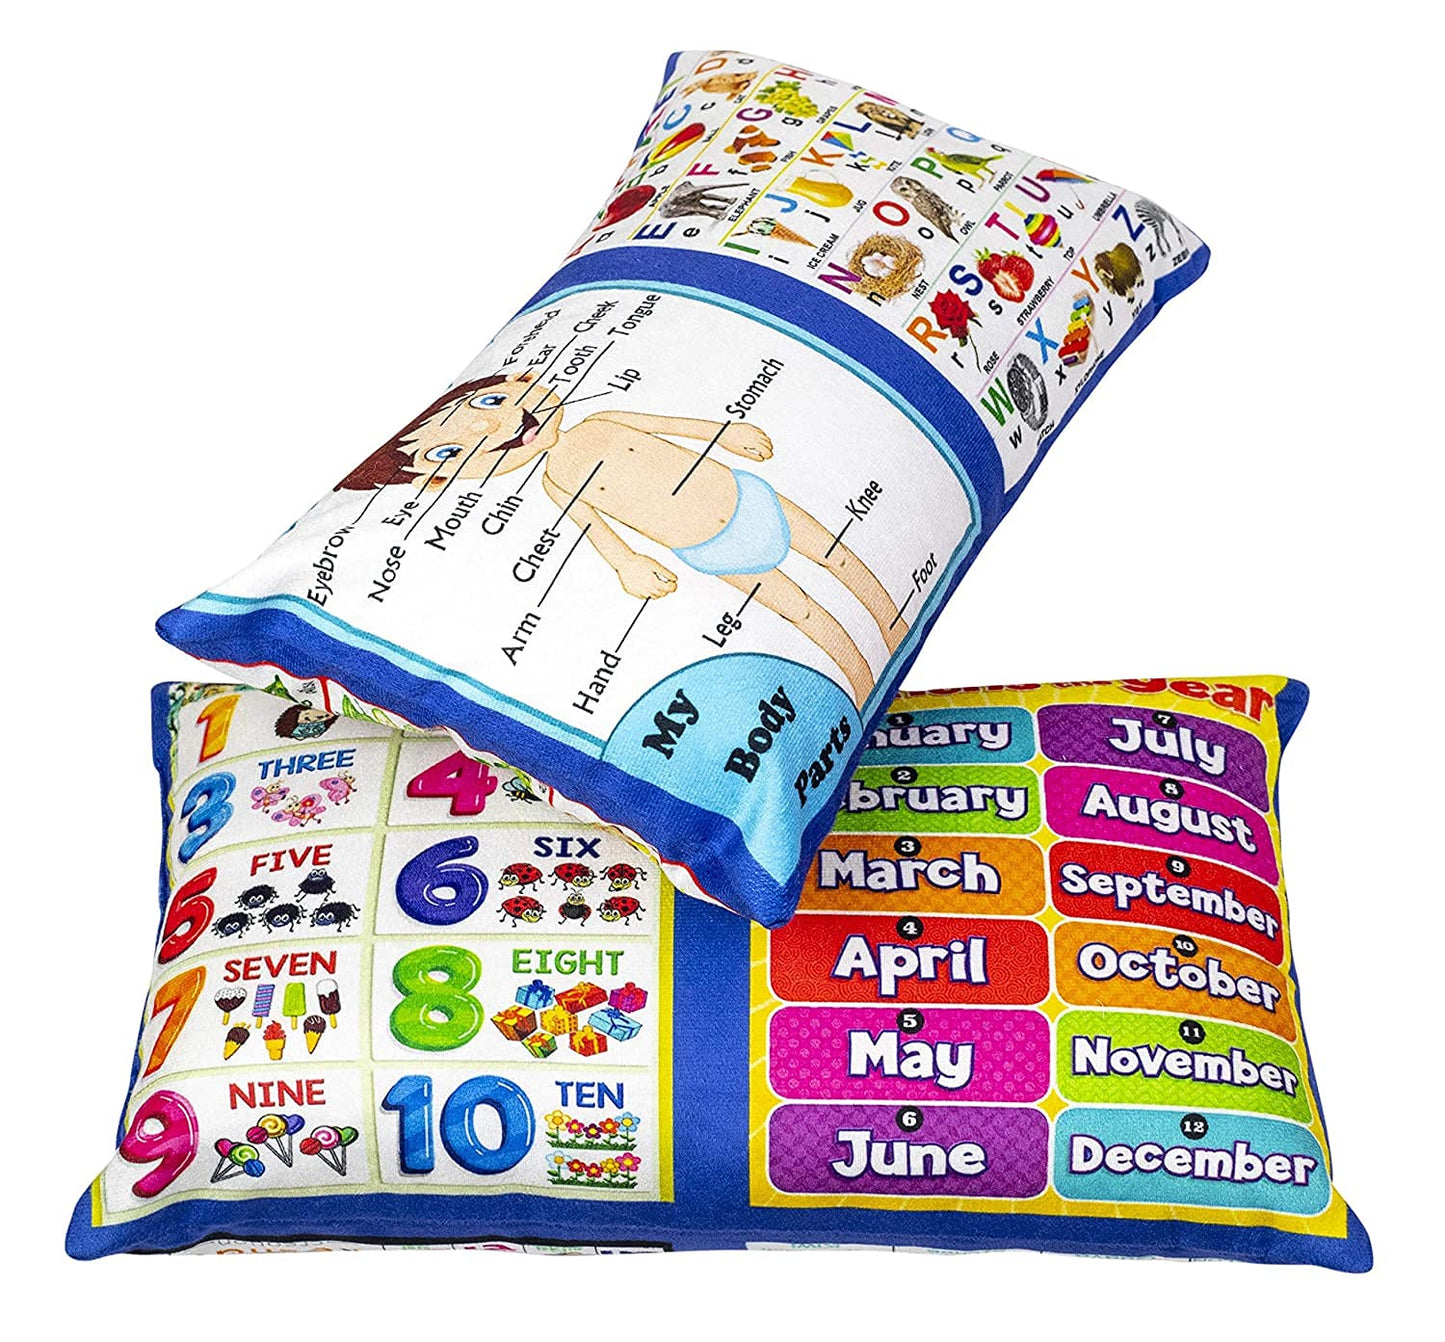 Kids Learning Pillow Cum Book English, Alphabets, Numbers, Vegetable, Body Parts, Printed Velvet Learning Pillow